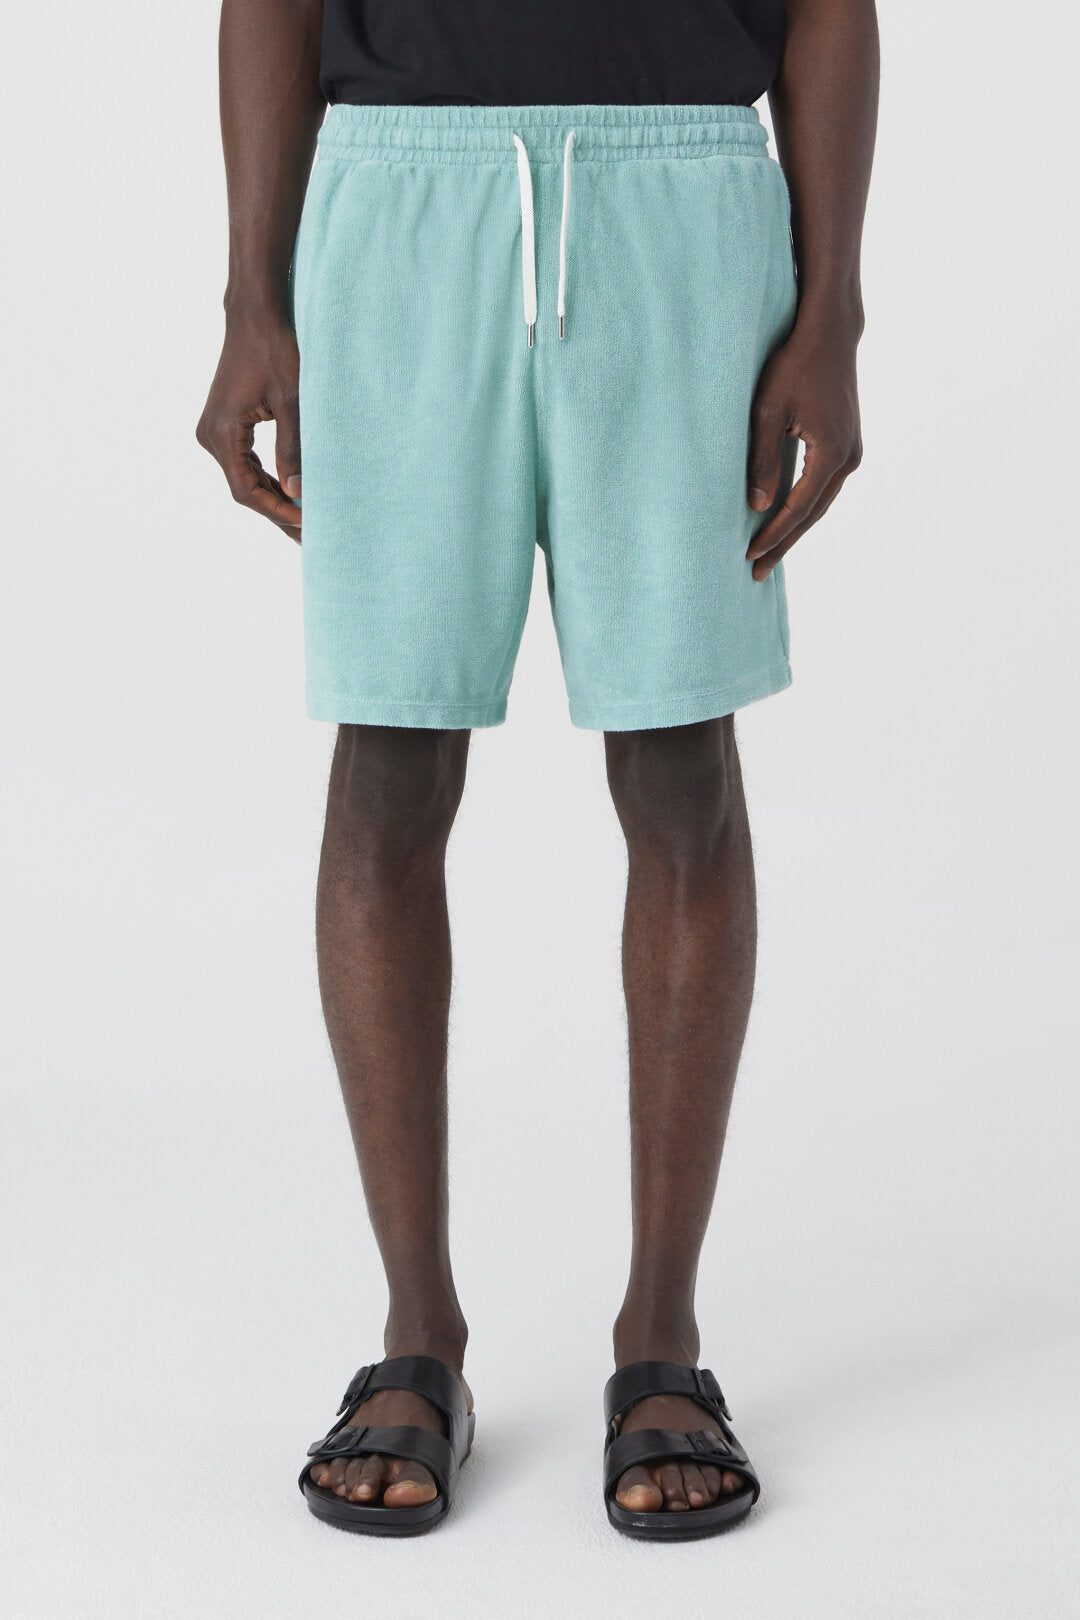 TERRY CLOTH SHORTS - BLUE AGAVE